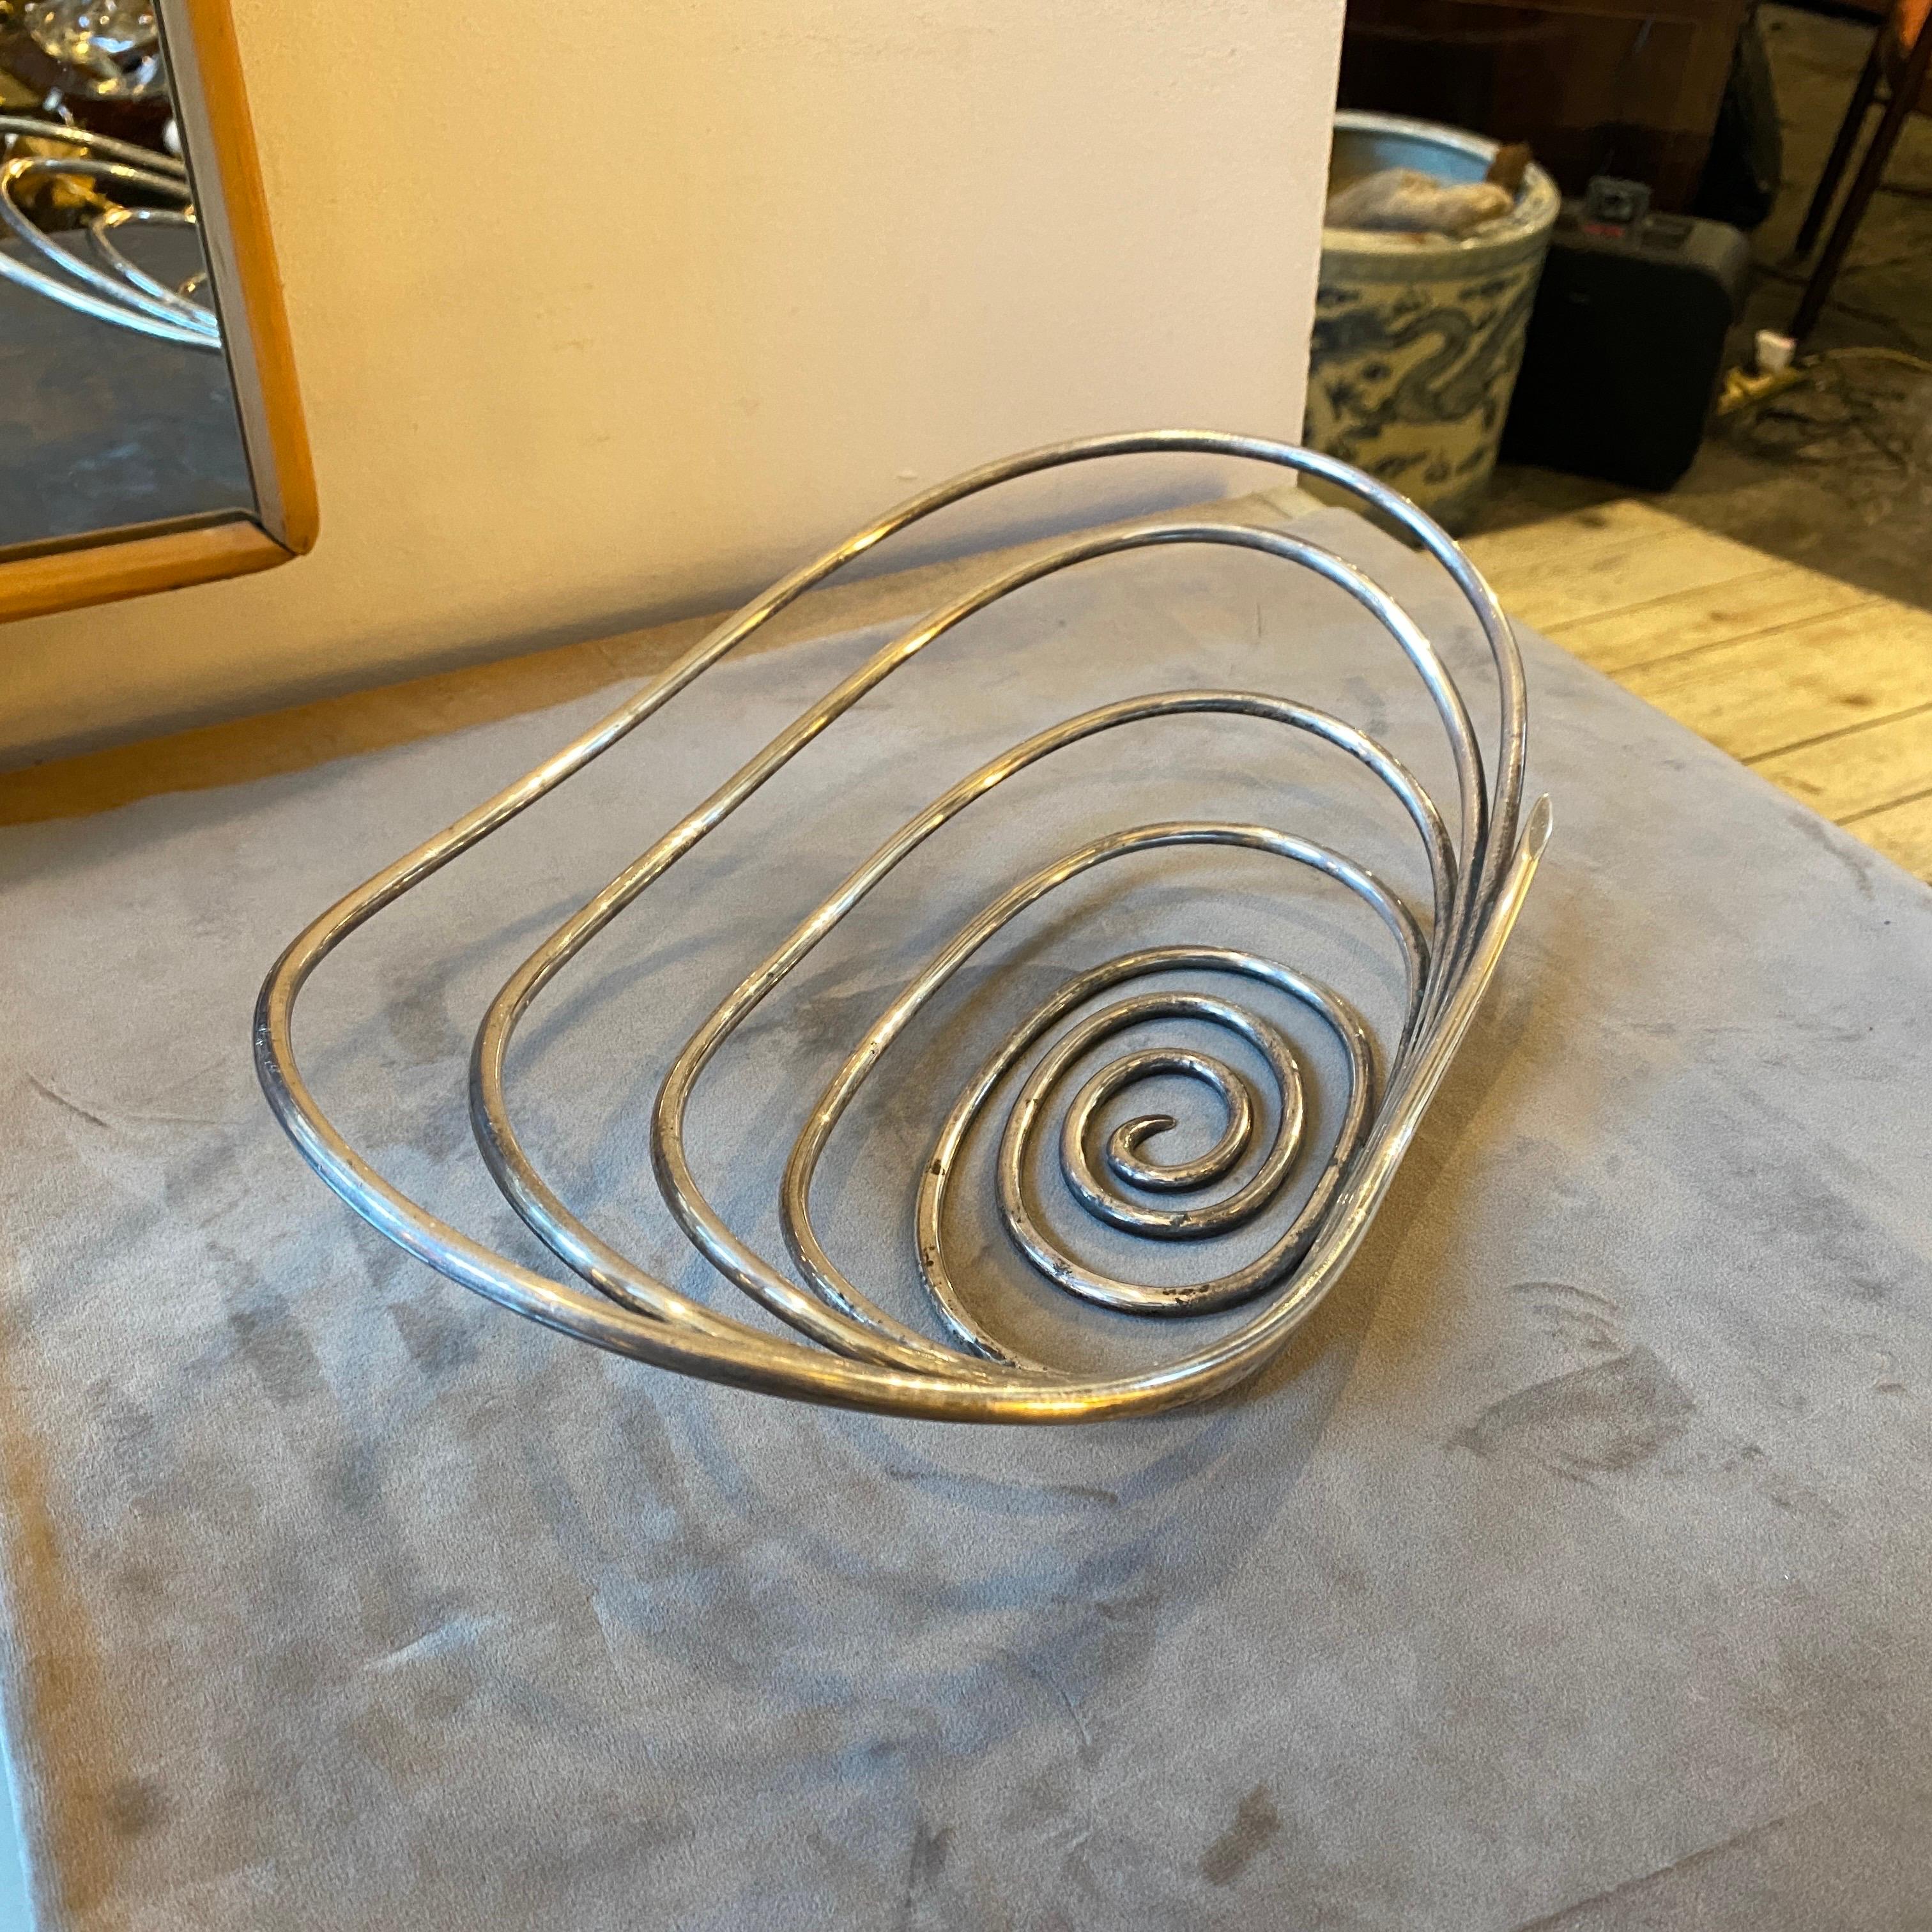 1970s Iconic Modernist Silver Plated Italian Basket Design by Lino Sabattini In Good Condition For Sale In Aci Castello, IT